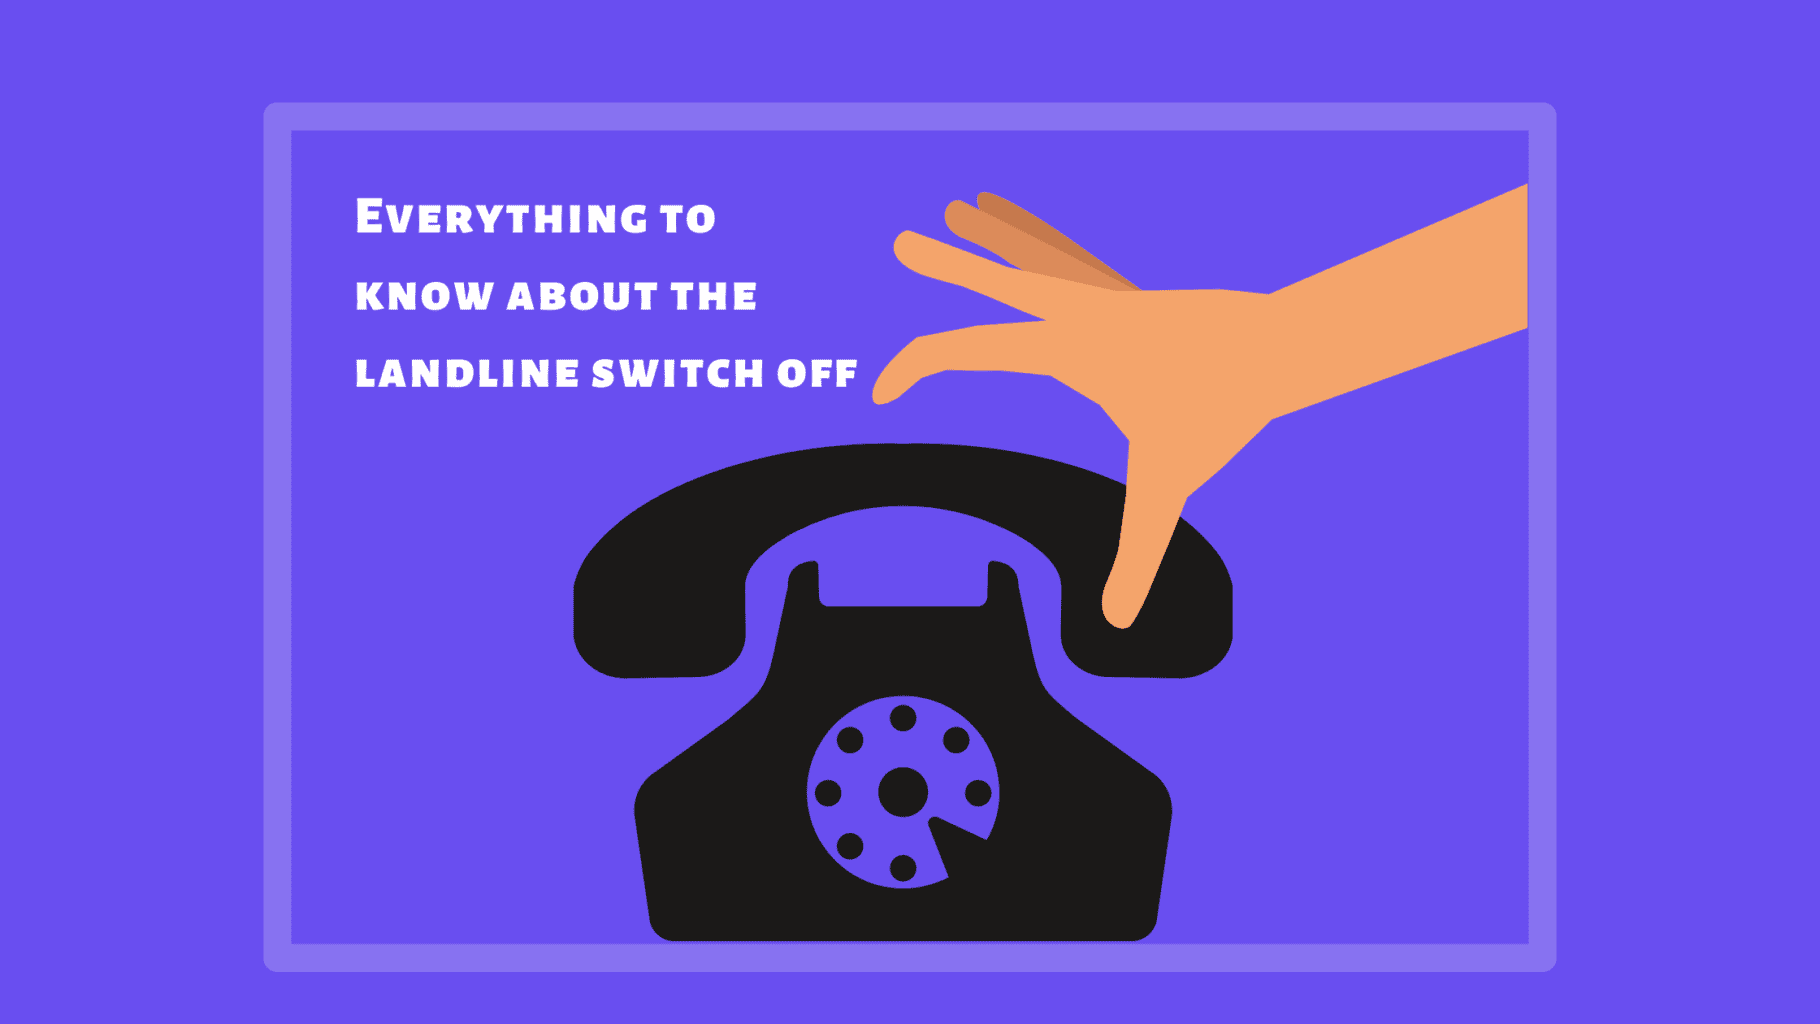 Everything to know about the landline switch off